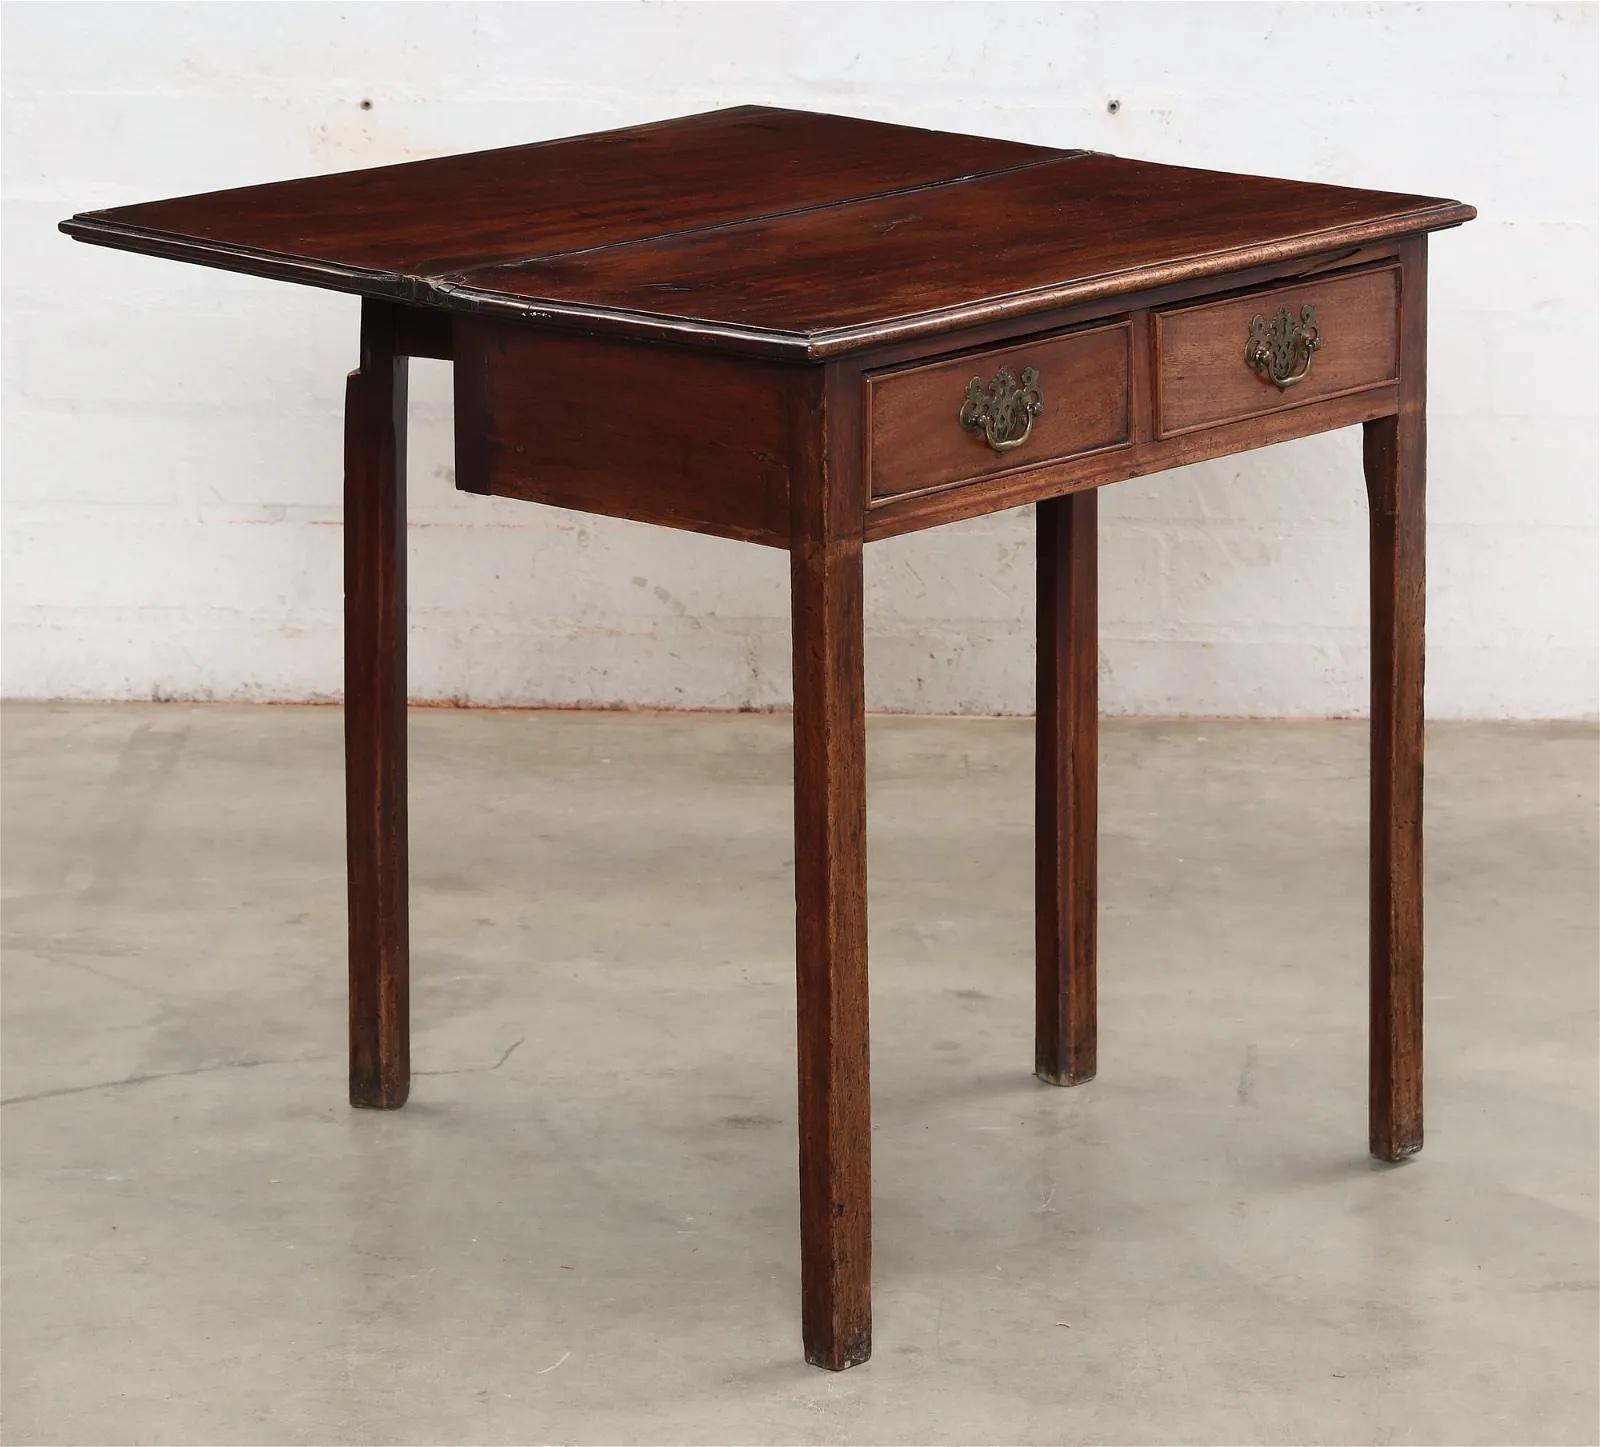 British Antique Period English George III Mahogany Flip Top Game Table Late 18th Century For Sale